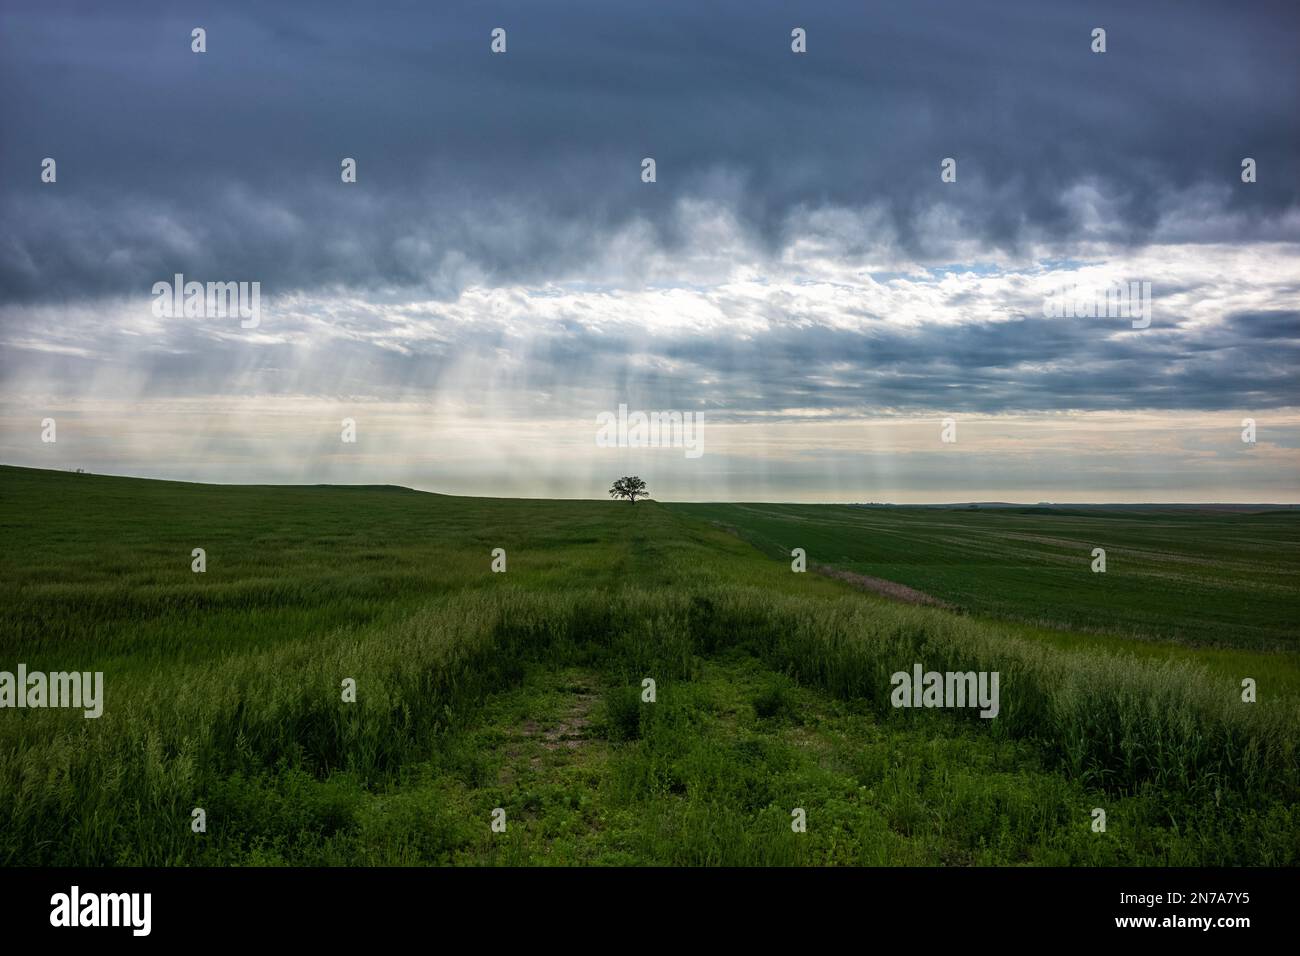 A single tree stands along the horizon in a field of grass as storm clouds rain on the landscape below. Stock Photo